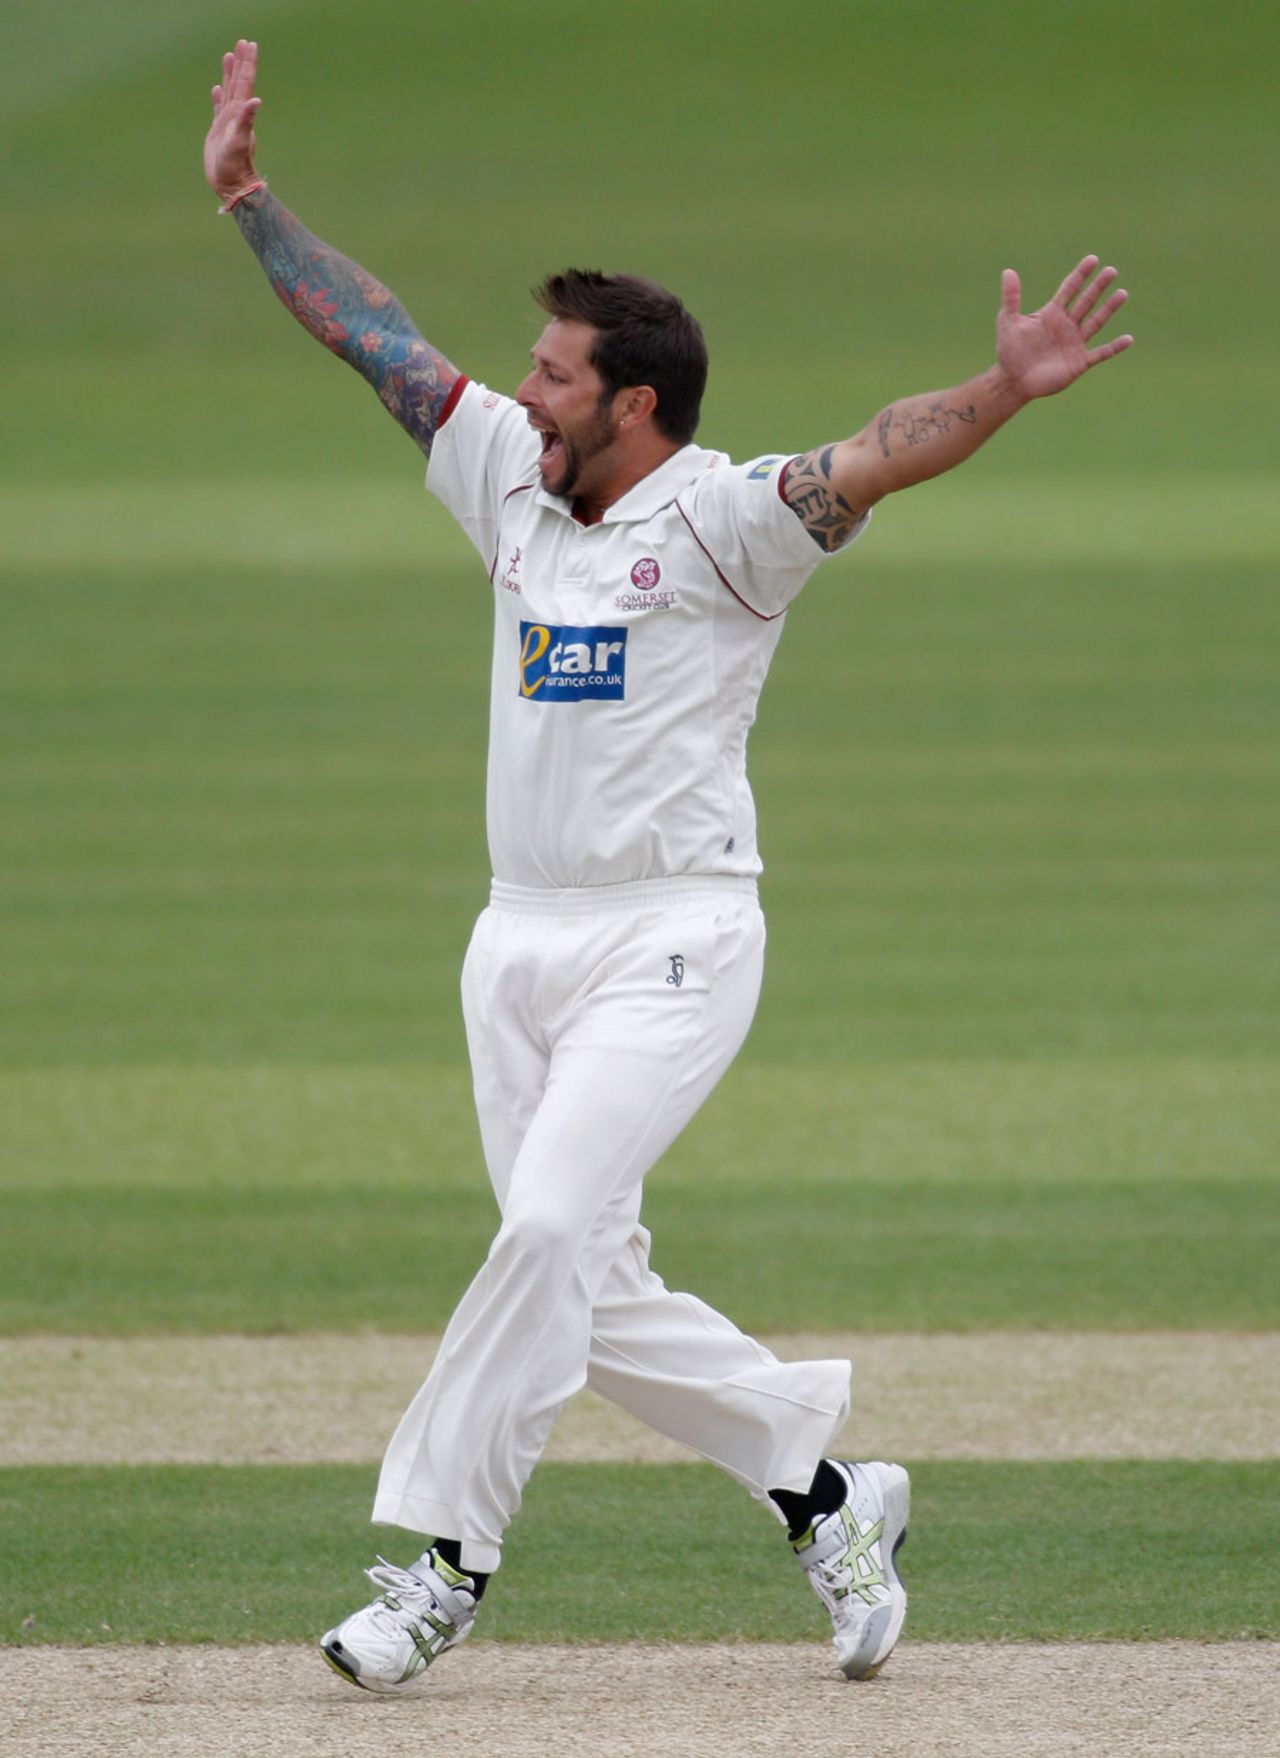 Peter Trego took five wickets in Worcestershire's first innings, Worcestershire v Somerset, County Championship, Division One, New Road, 2nd day, May 31, 2012